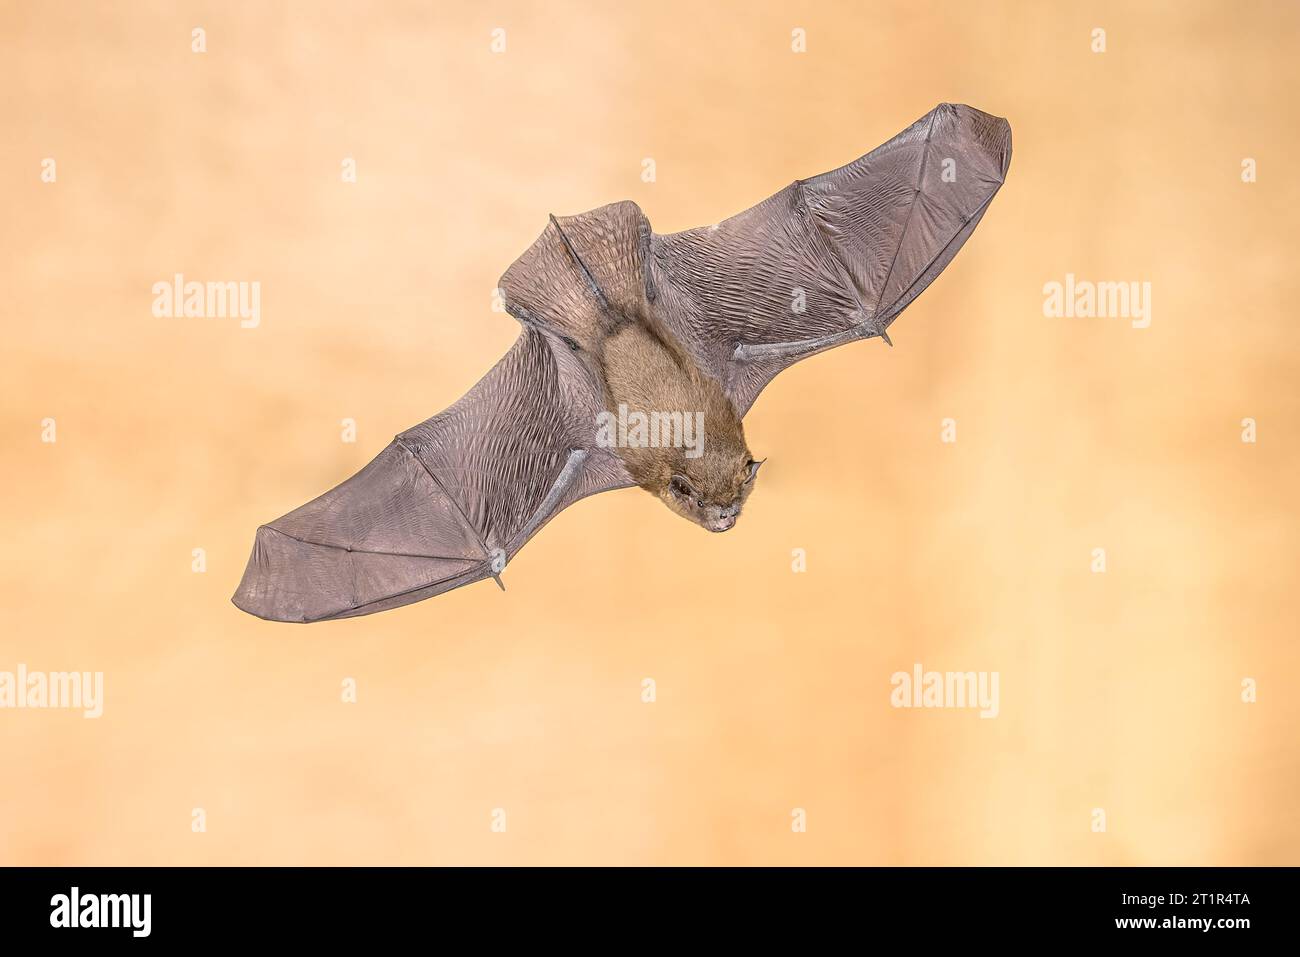 Flying Common Pipistrelle Bat (Pipistrellus pipistrellus) is a small pipistrelle microbat whose very large range extends across most of Europe, North Stock Photo